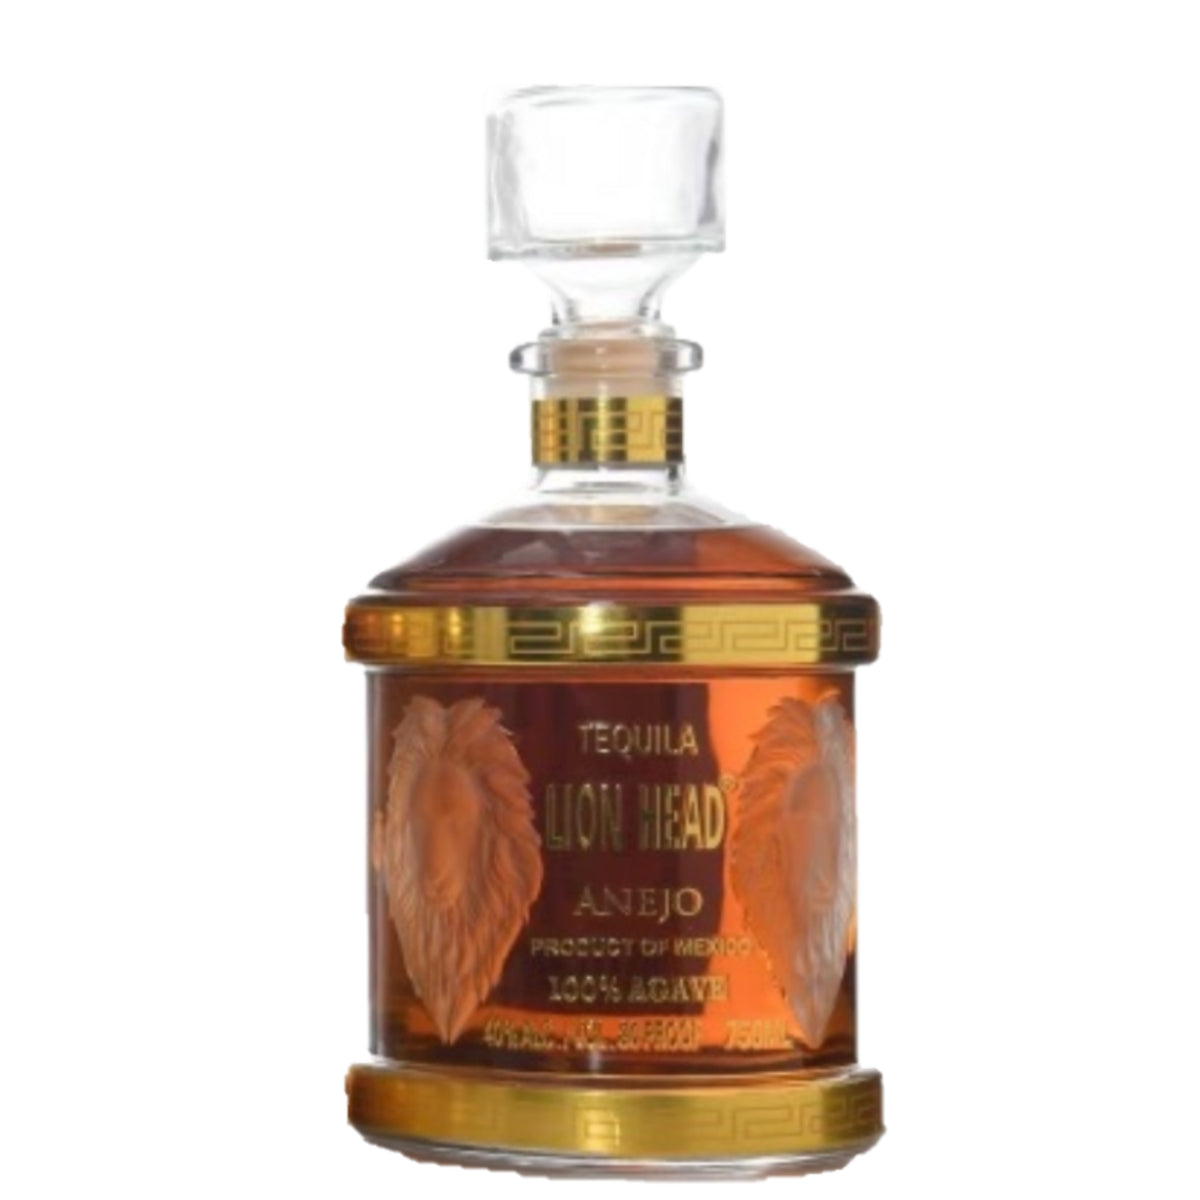 Lion Head Blended Scotch Whisky 1L - Old Town Tequila